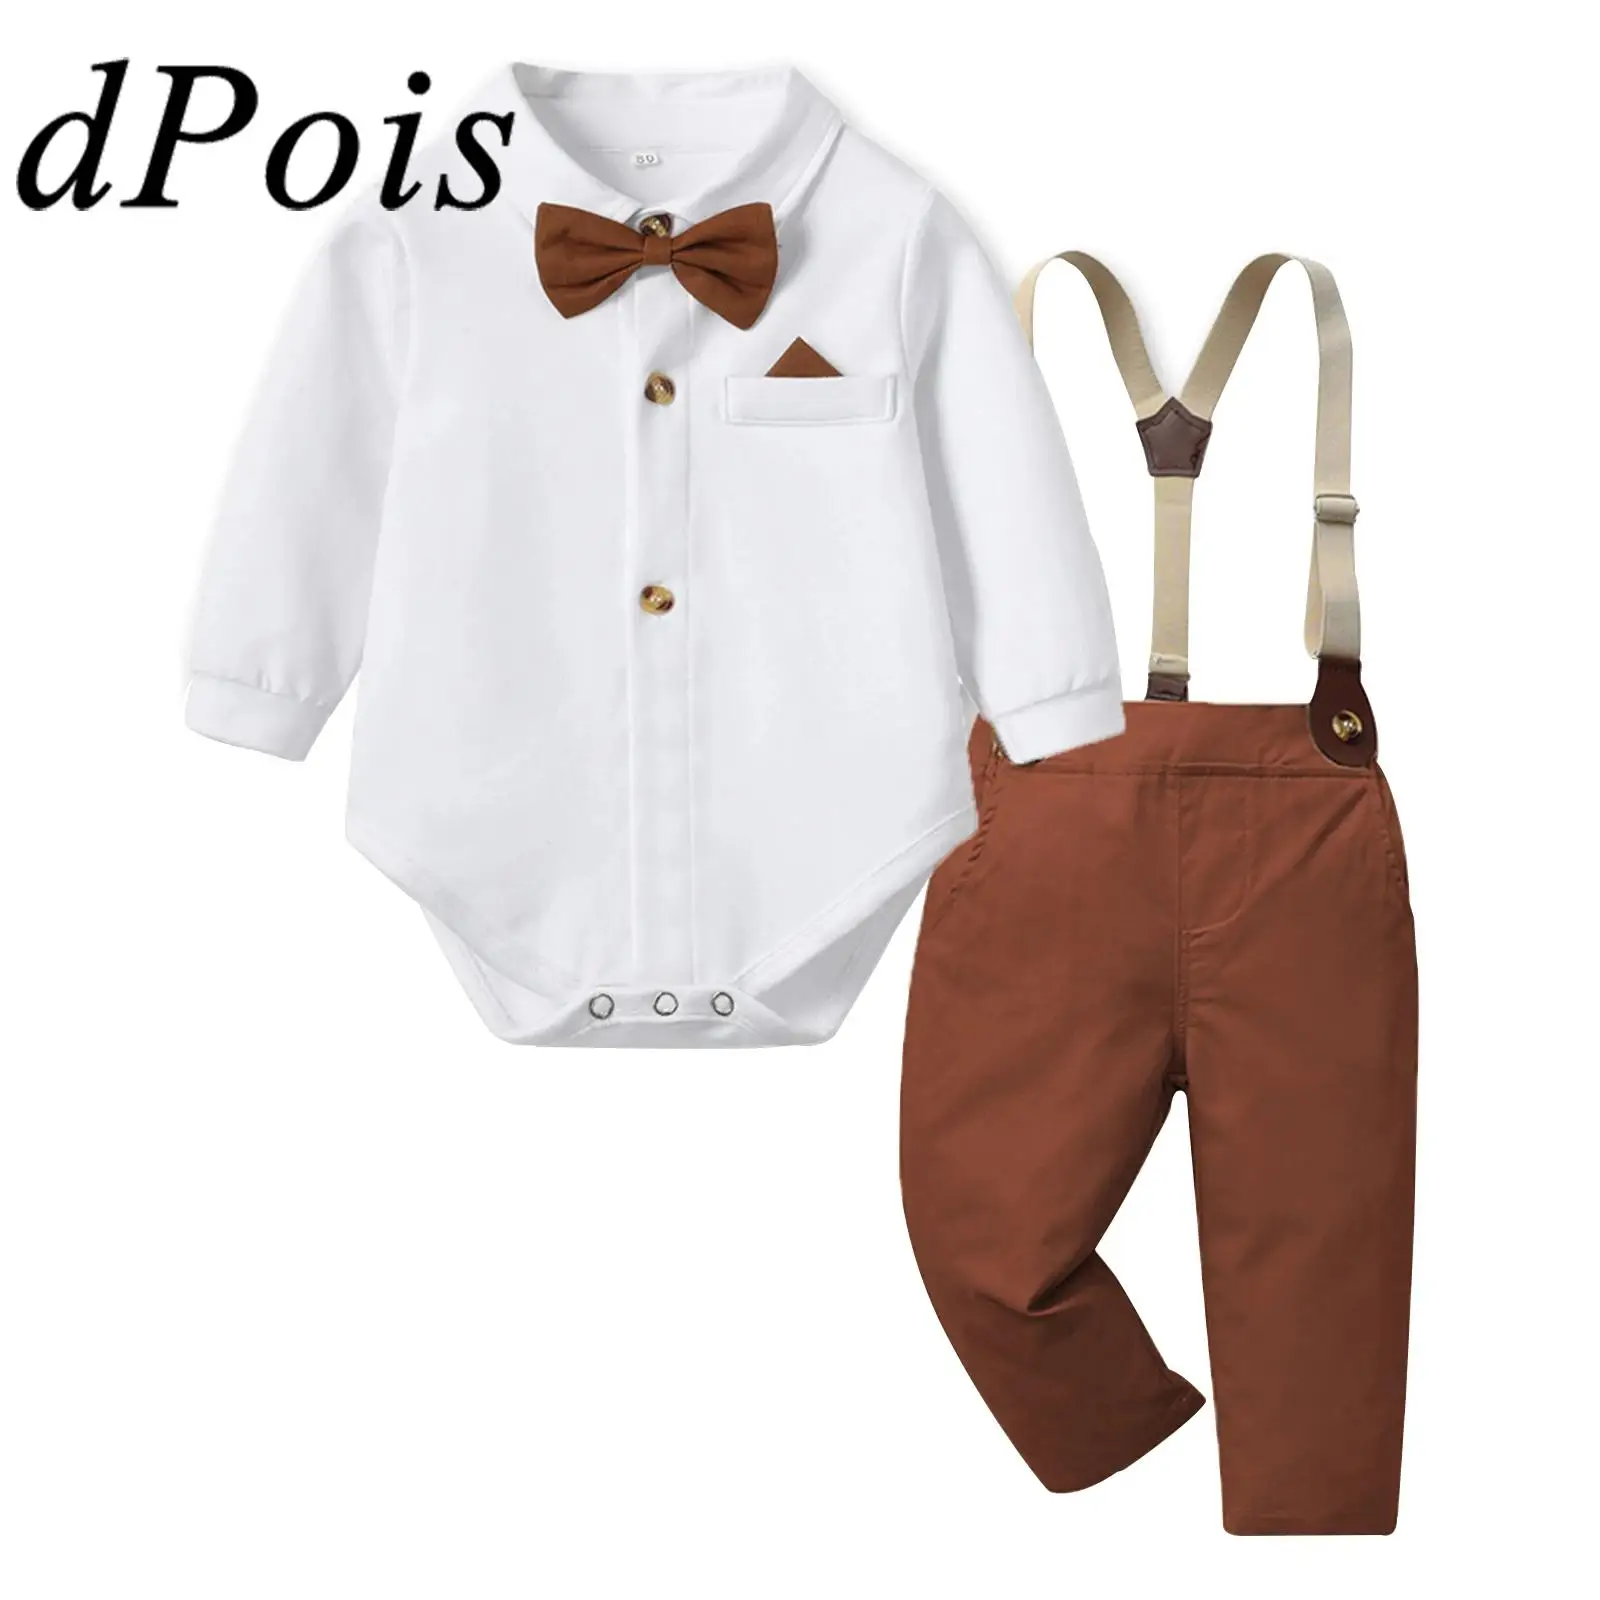 

Kids Toddler Boys Gentleman Suit Long Sleeve Clothes Sets Baptism Gown Outfit for Birthday Party